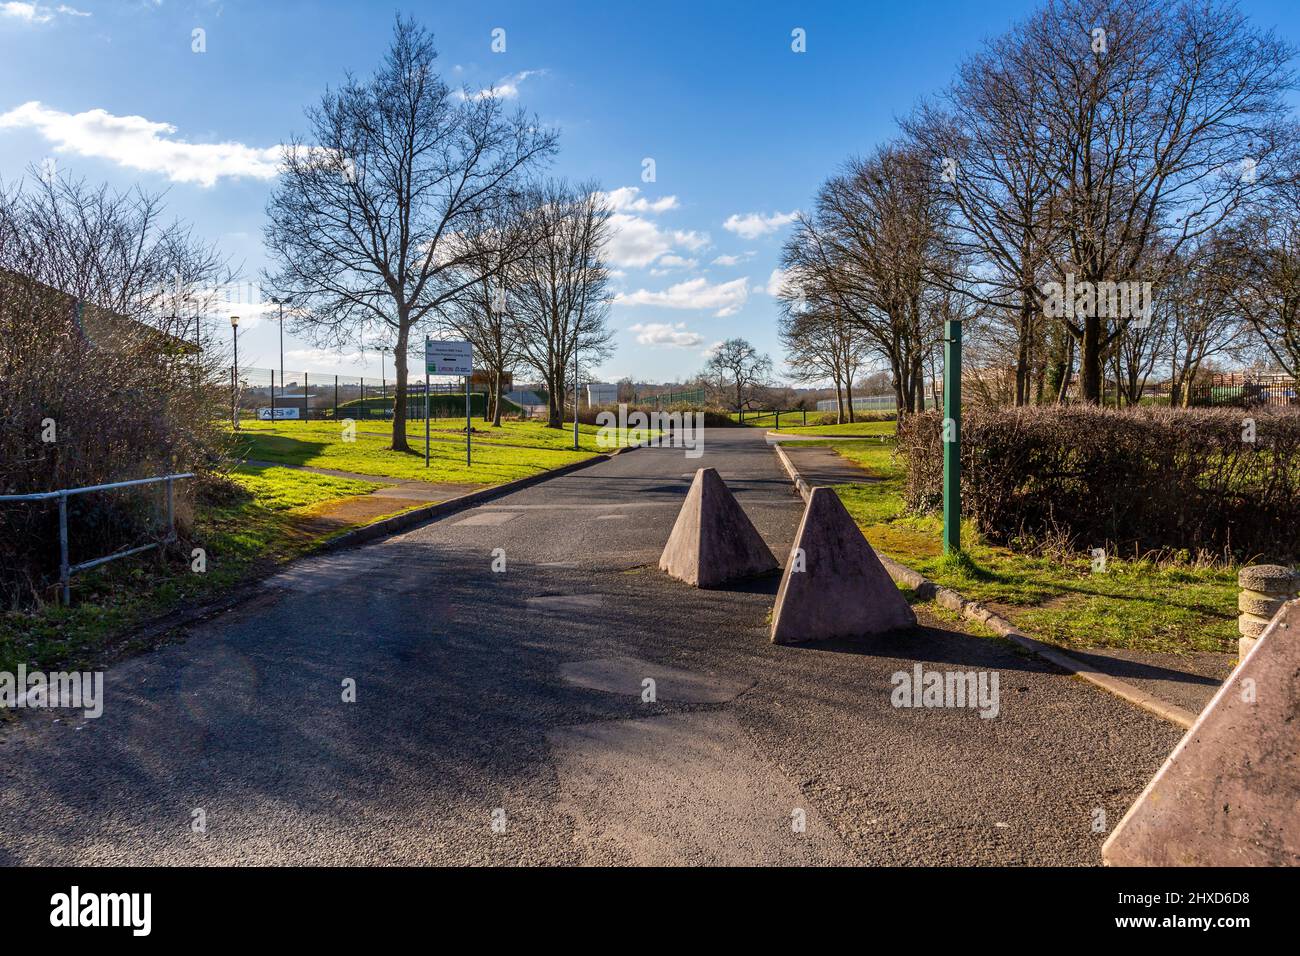 Entrance to Redditch BMX Track, Redditch, Worcestershire. Stock Photo